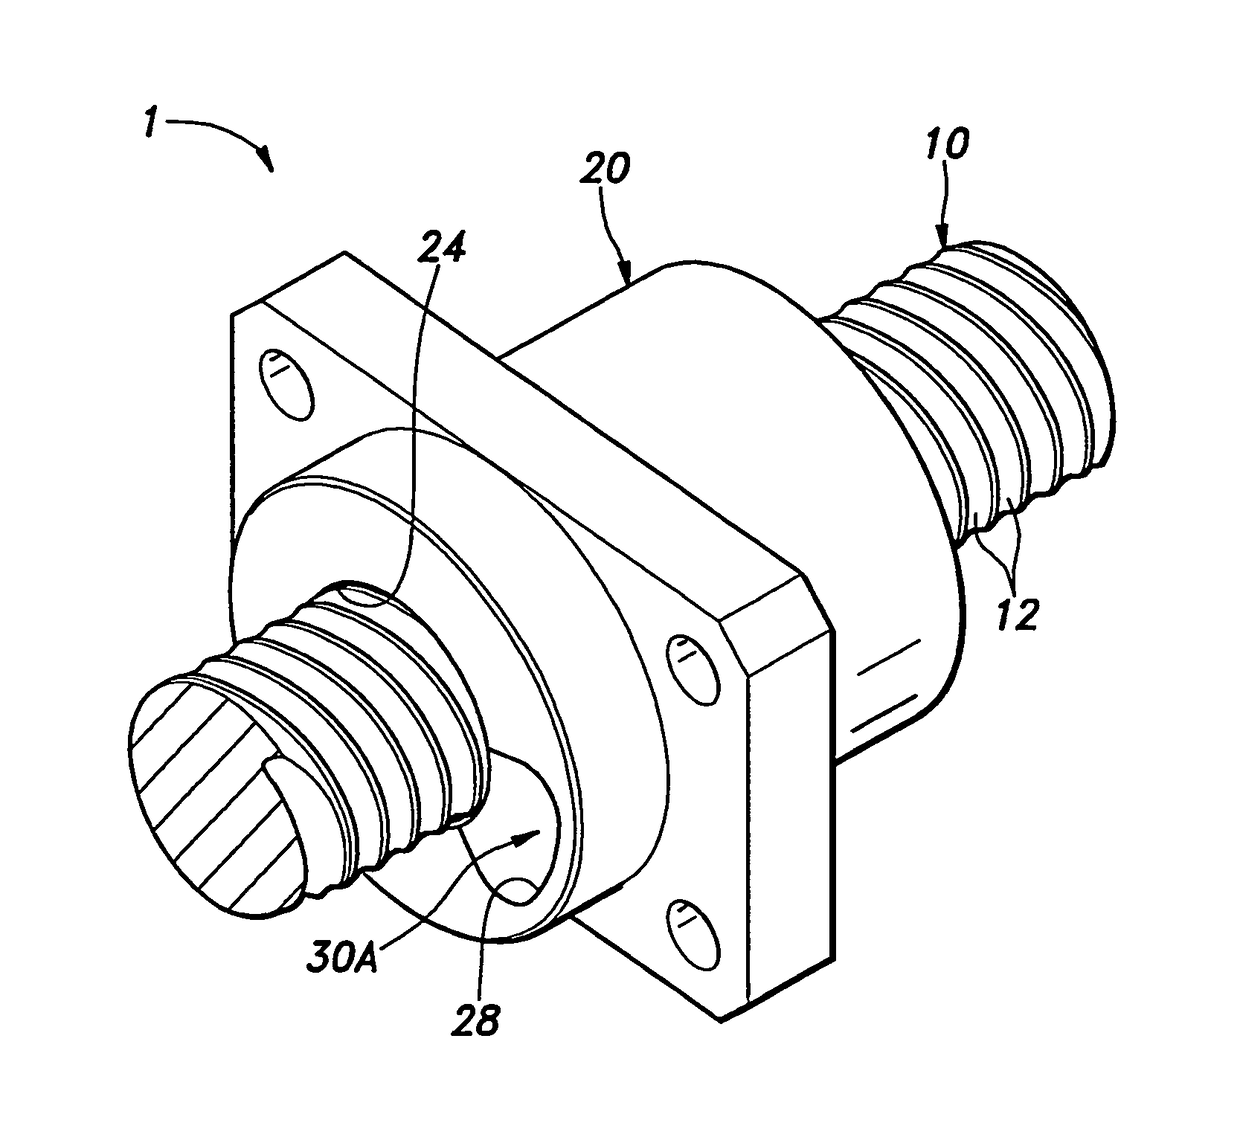 Plastic nut for ball screw and method for manufacturing same